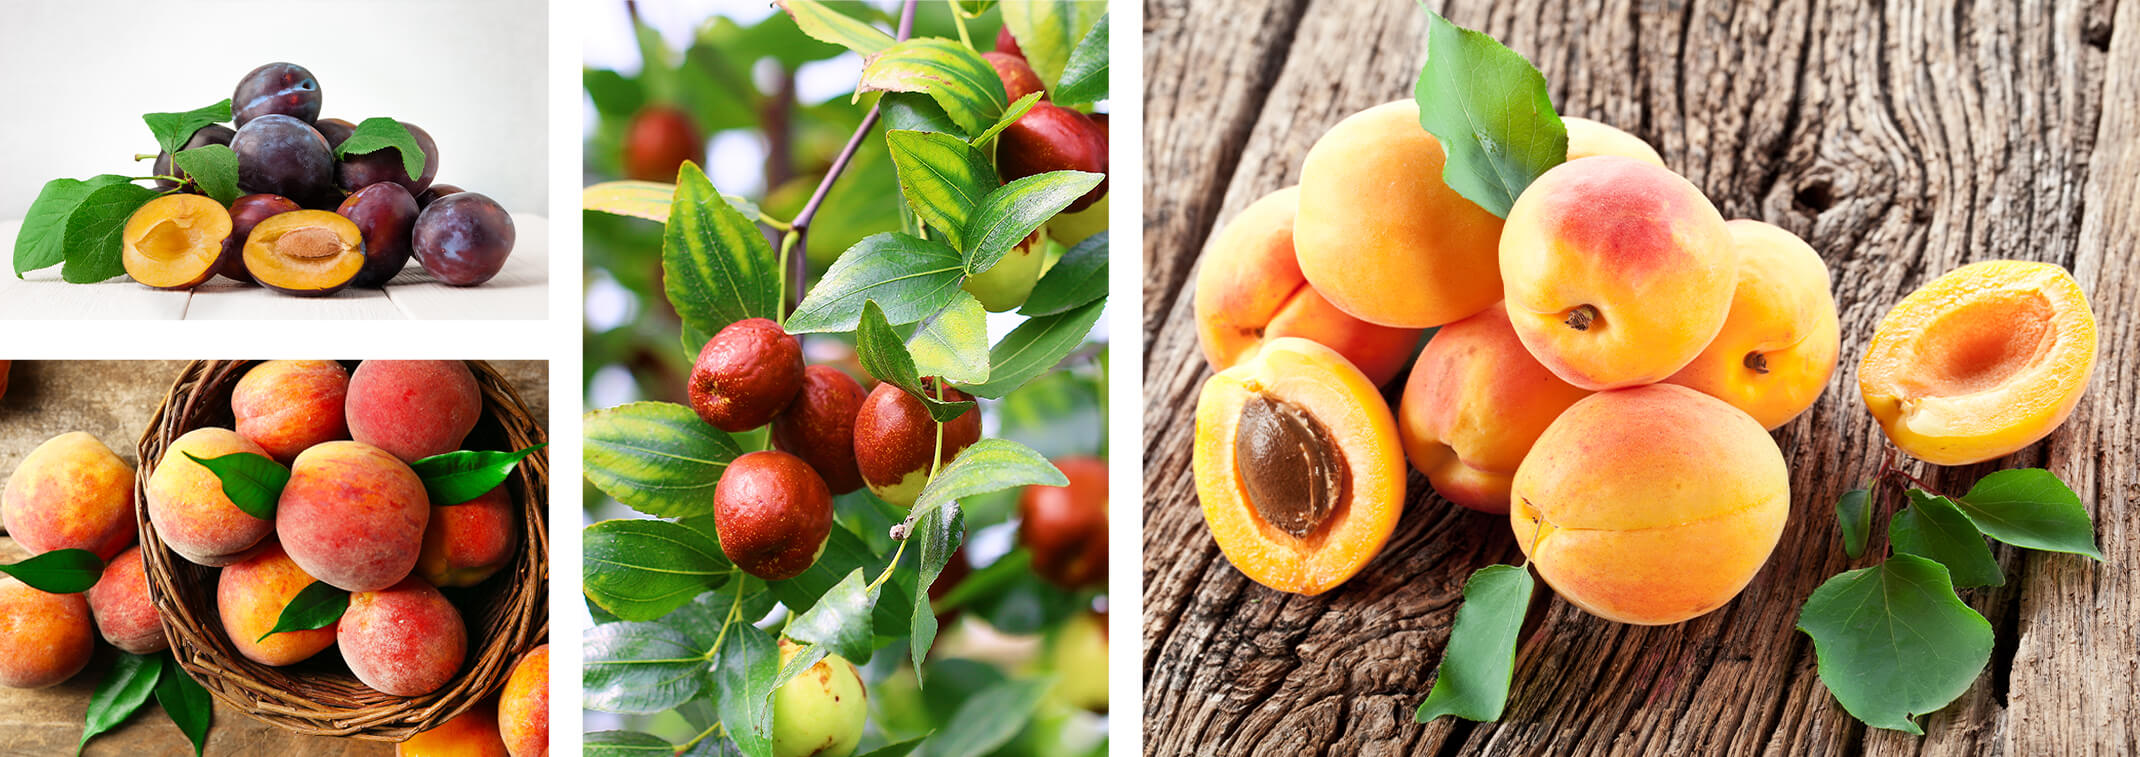 4 images: fresh picked plums on a white wood table (one sliced open); fresh peaches in a basket and on a wooden table; a closeup of a fruiting Jujube tree; and fresh apricots on rustic wood (one sliced open)